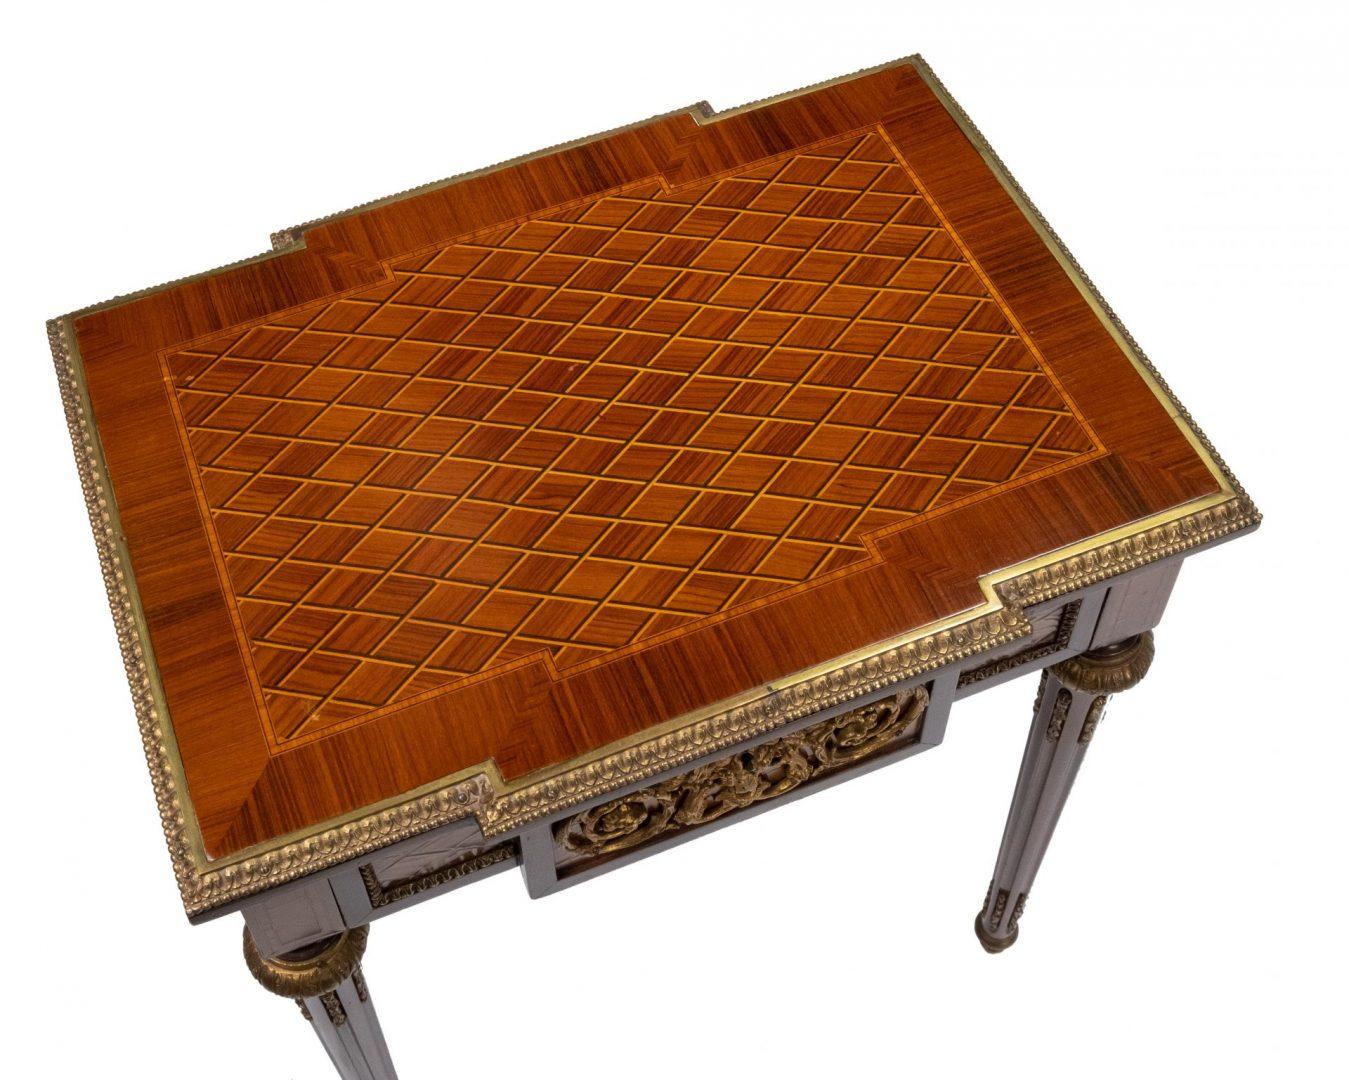 French Pair of Gilt Metal-Mounted Kingwood and Marquetry End Tables of Louis XVI Style